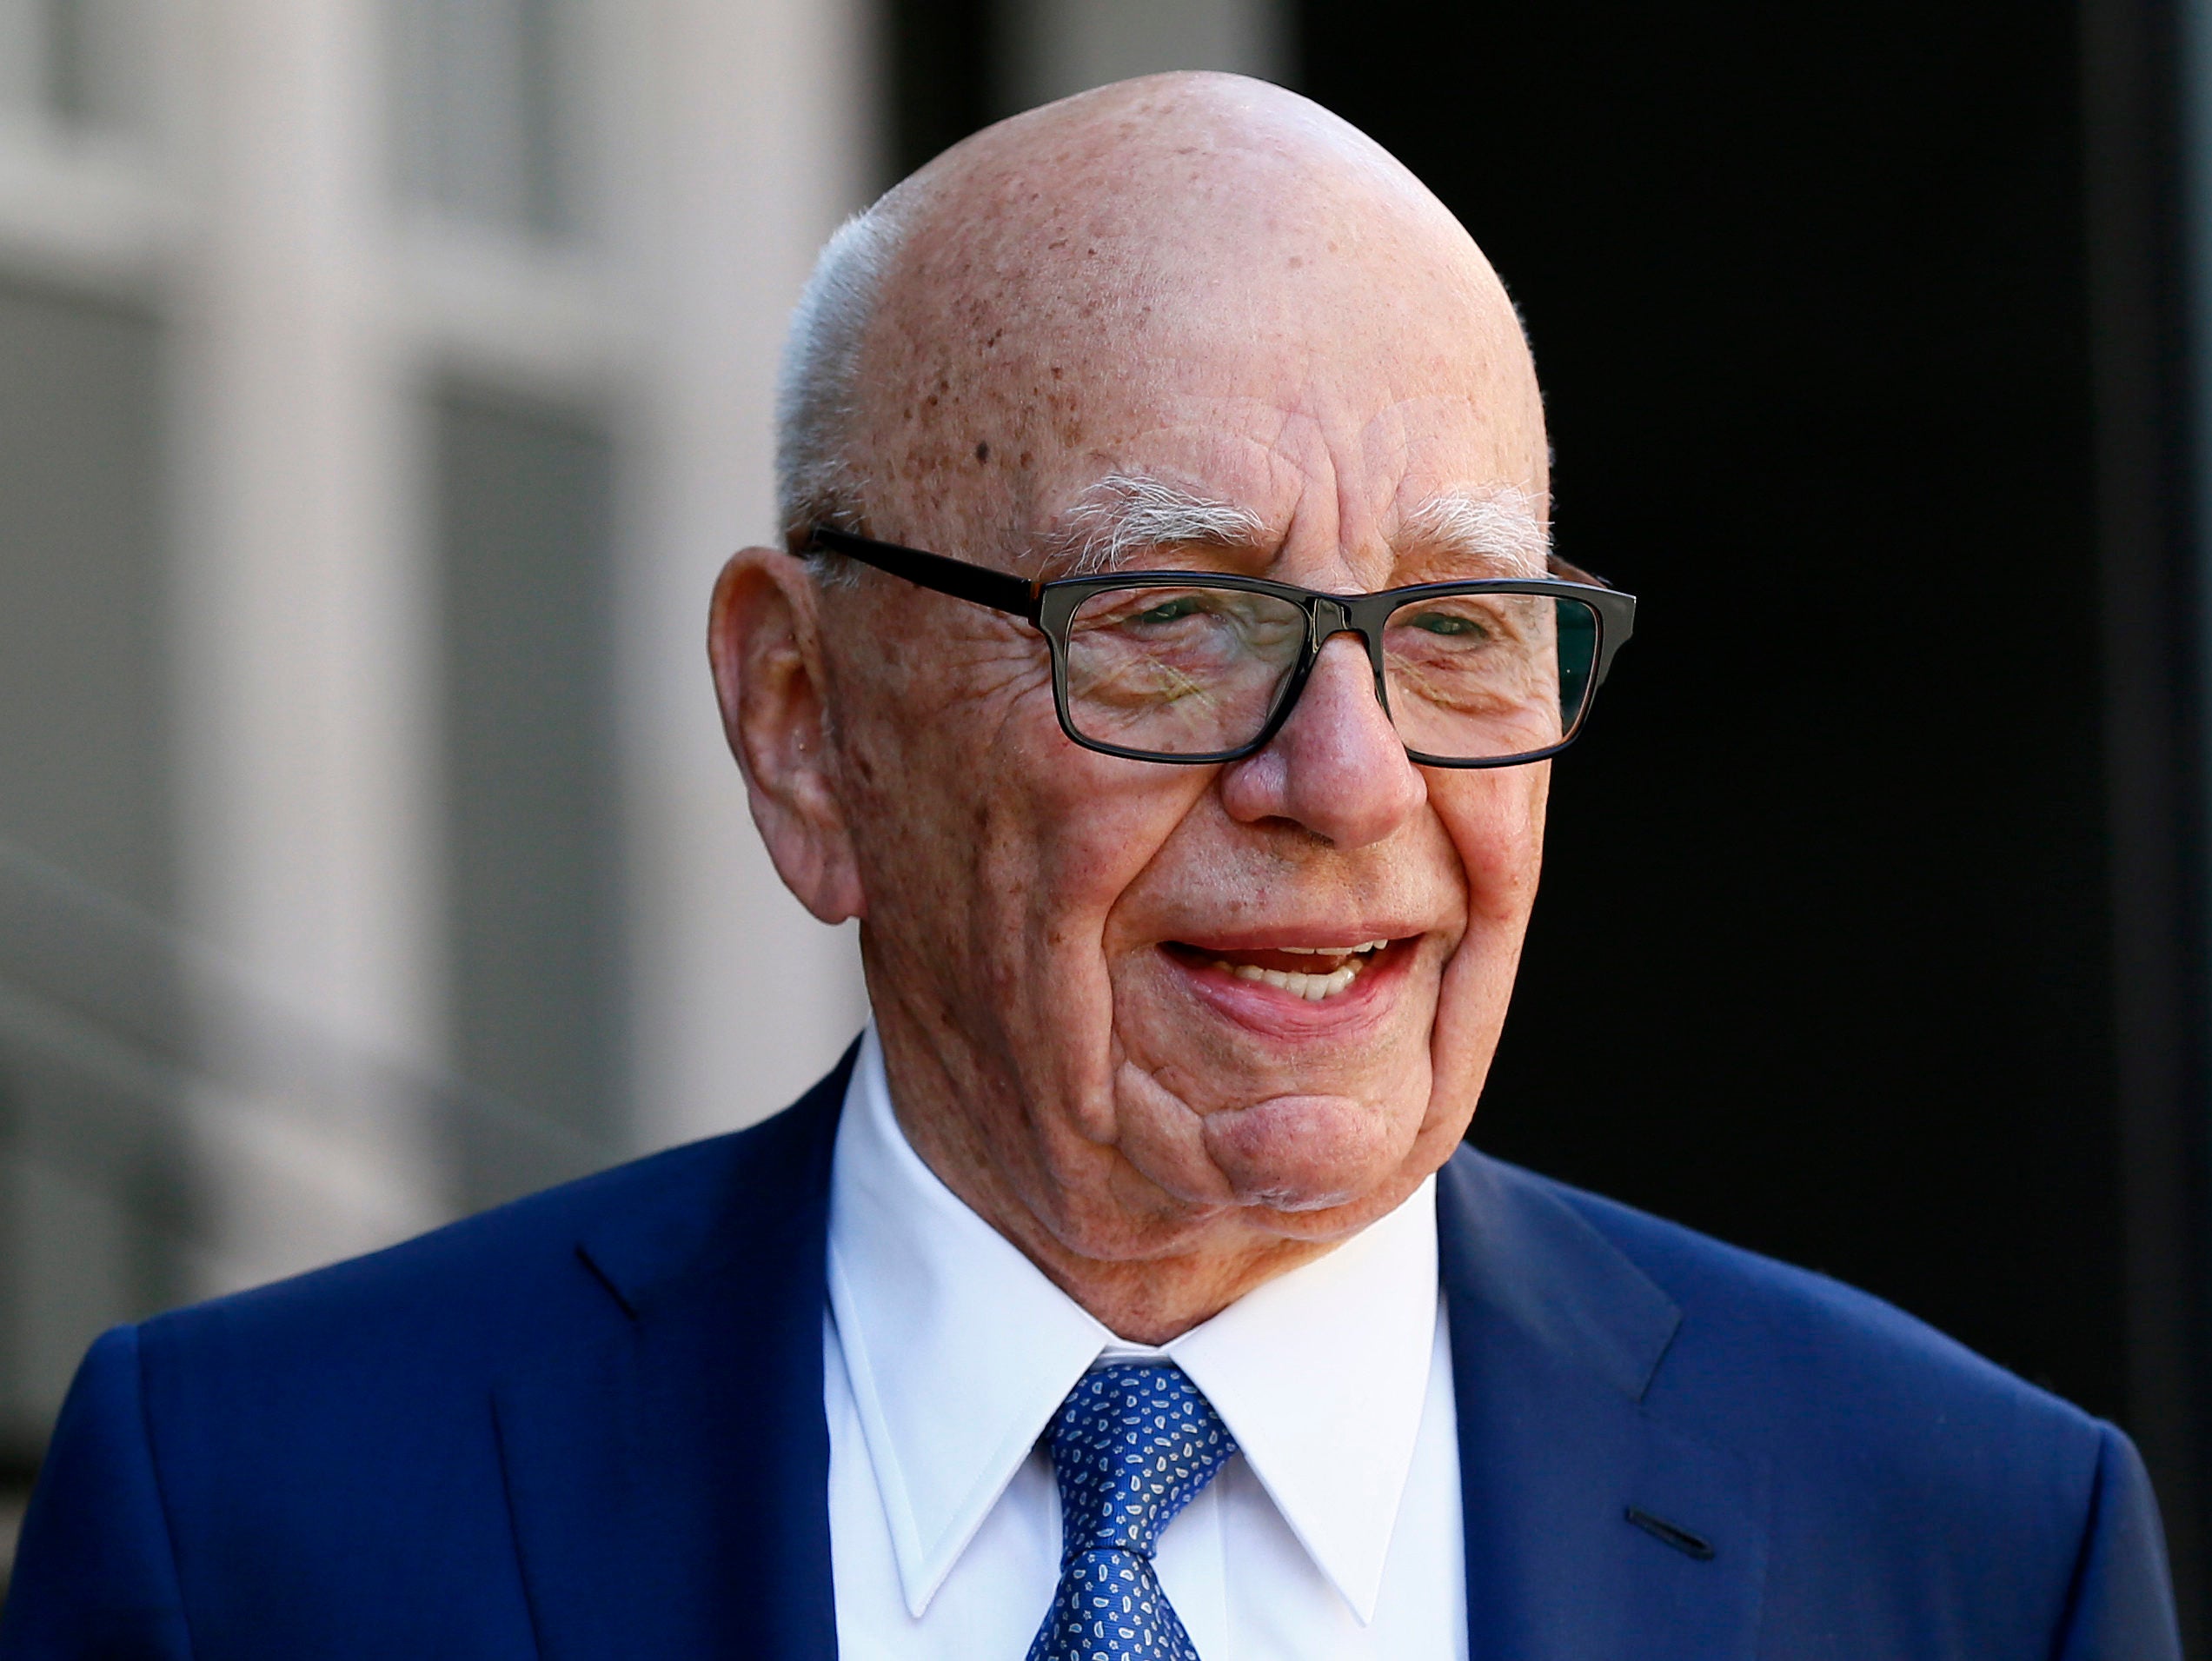 UK Government refers £11.7bn Murdoch Sky take-over bid to Ofcom and Competition Authority